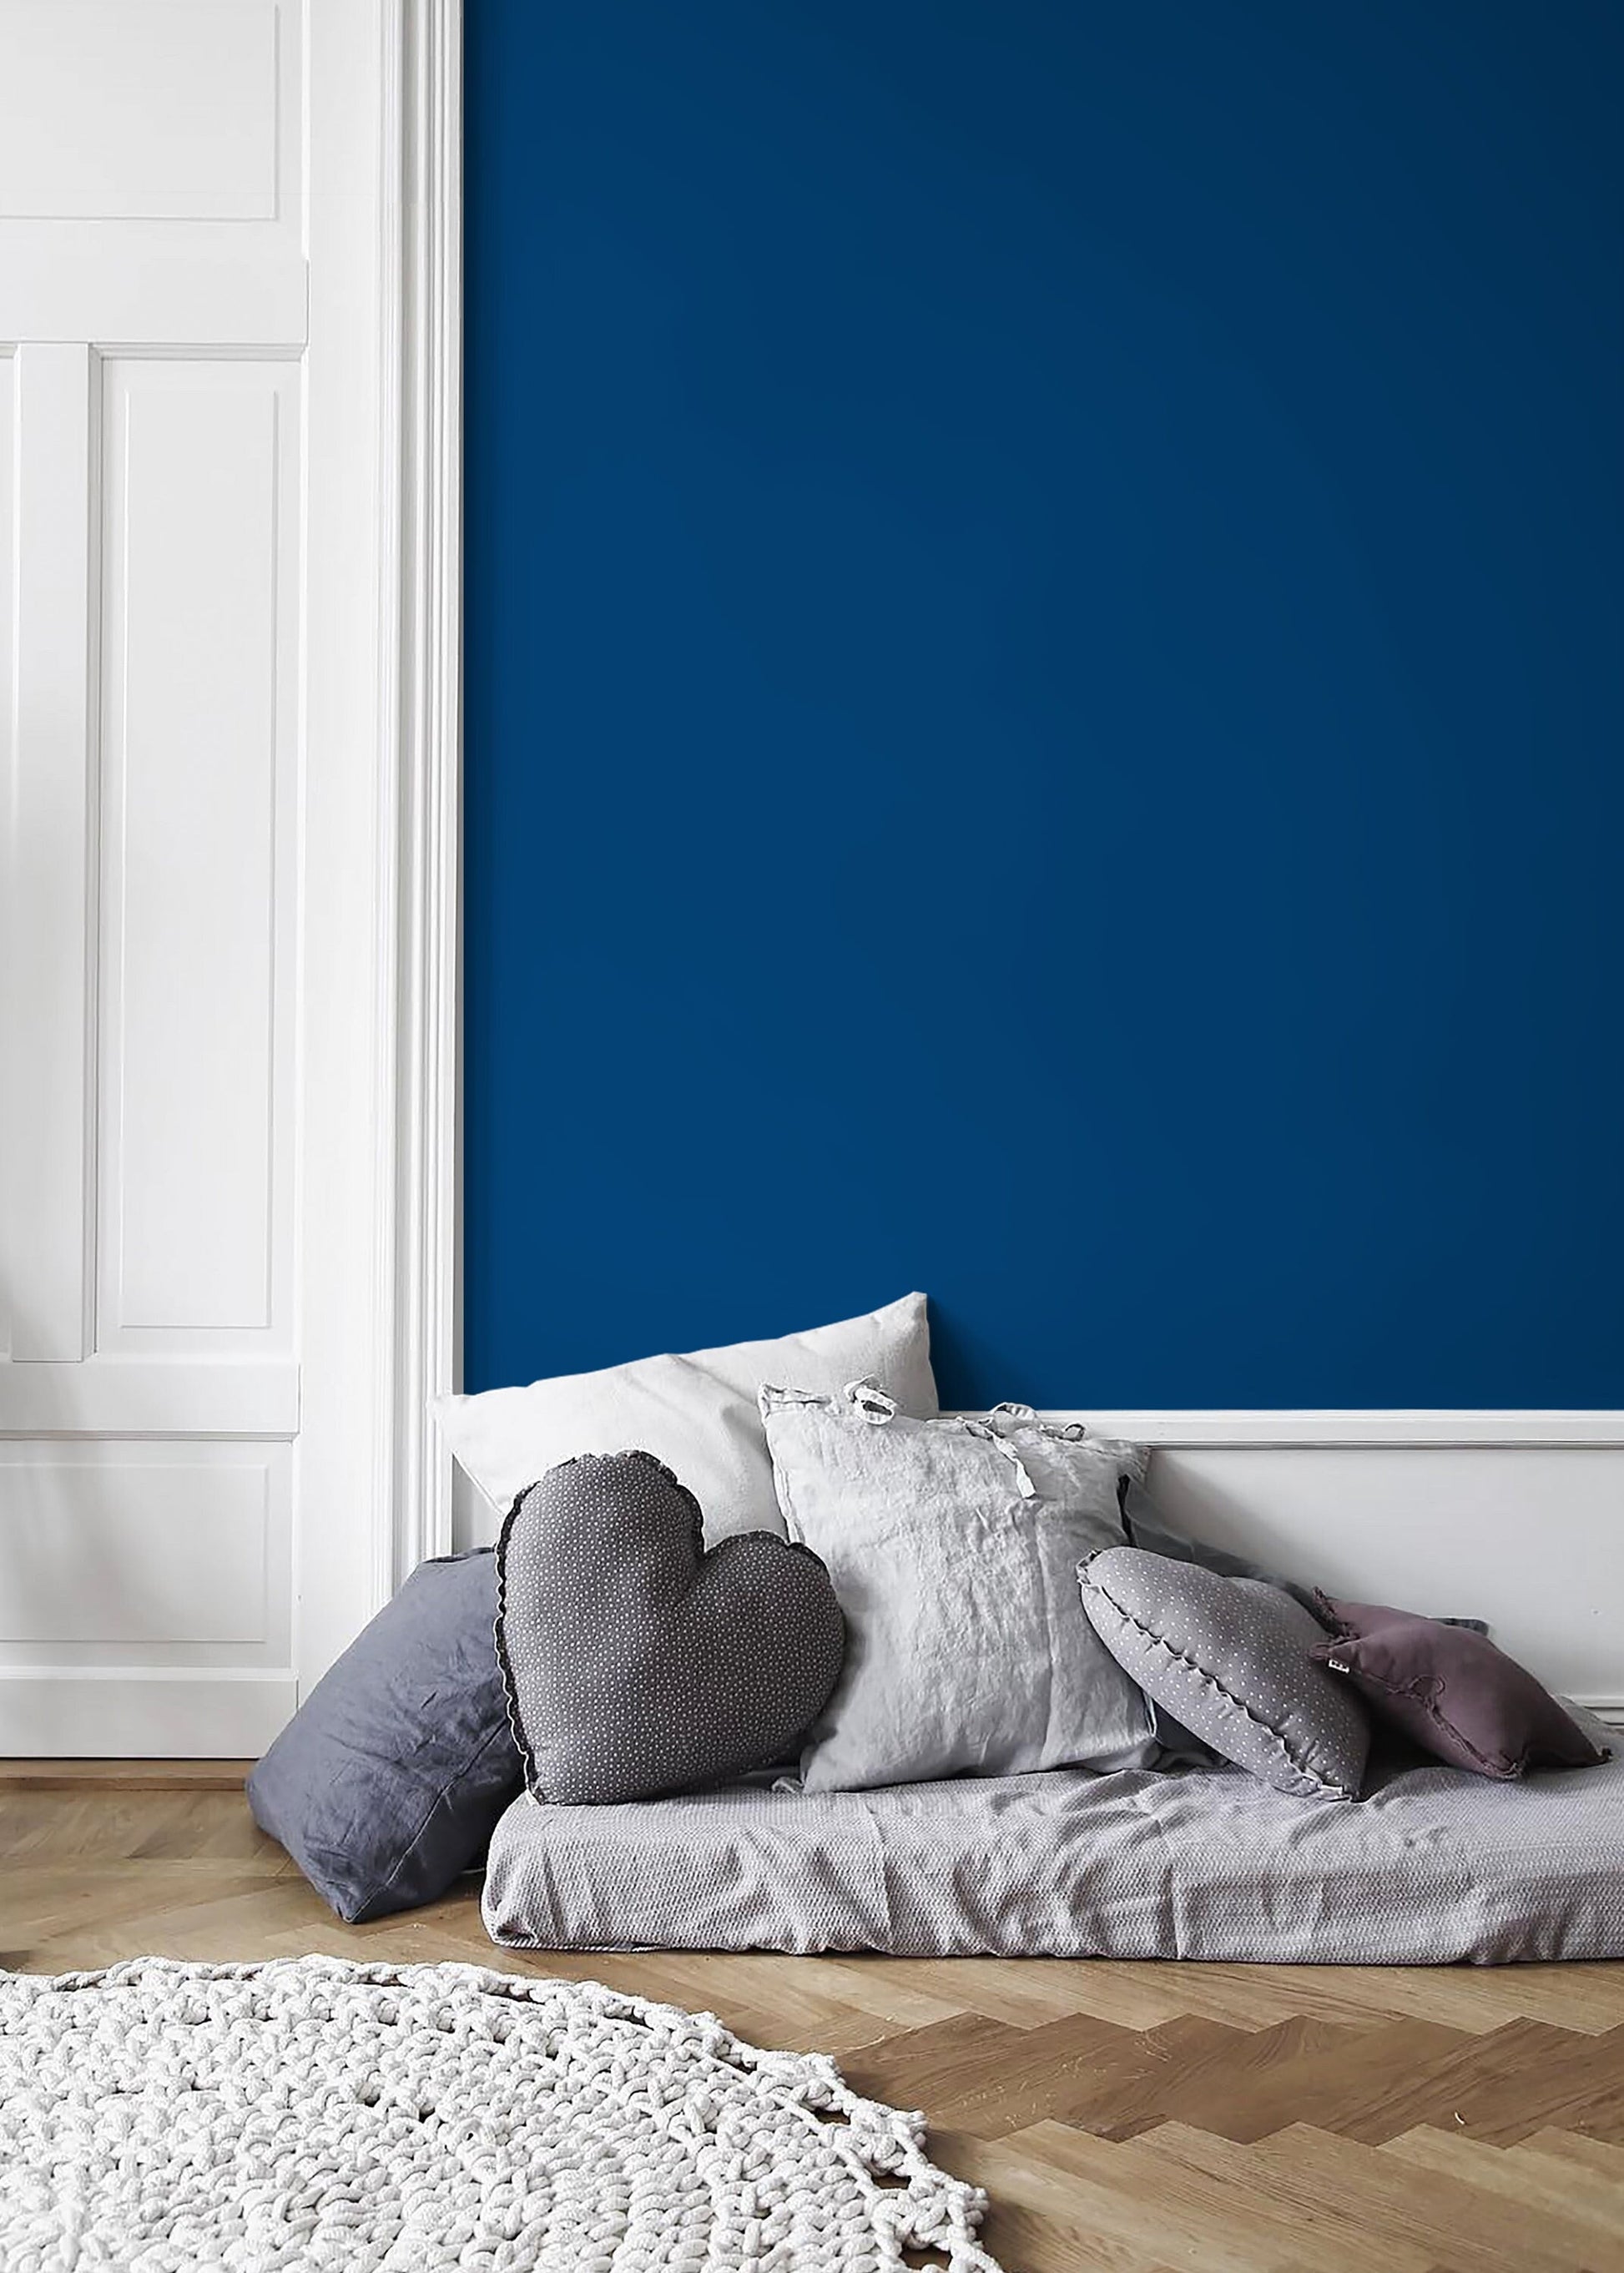 Blue Suede Wallpaper / Solid Color / Peel and Stick Wallpaper Removable Wallpaper Home Decor Wall Art Wall Decor Room Decor - D447